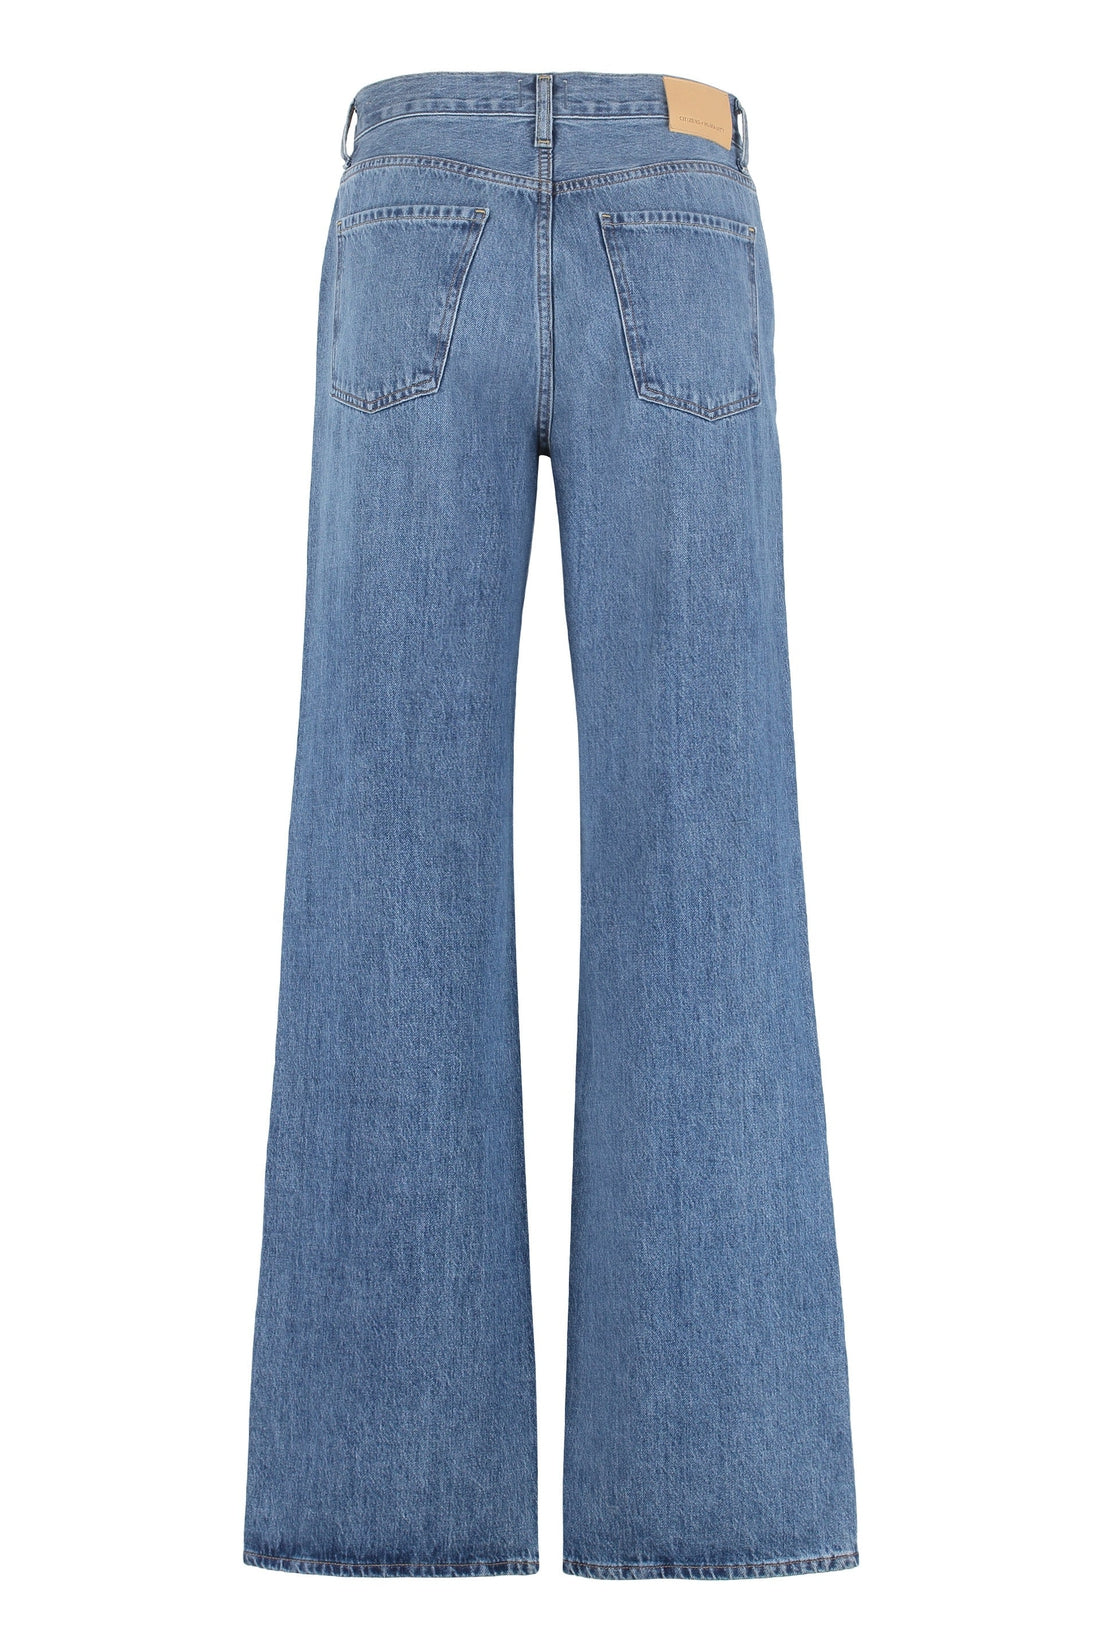 Citizens of Humanity-OUTLET-SALE-Annina wide leg jeans-ARCHIVIST